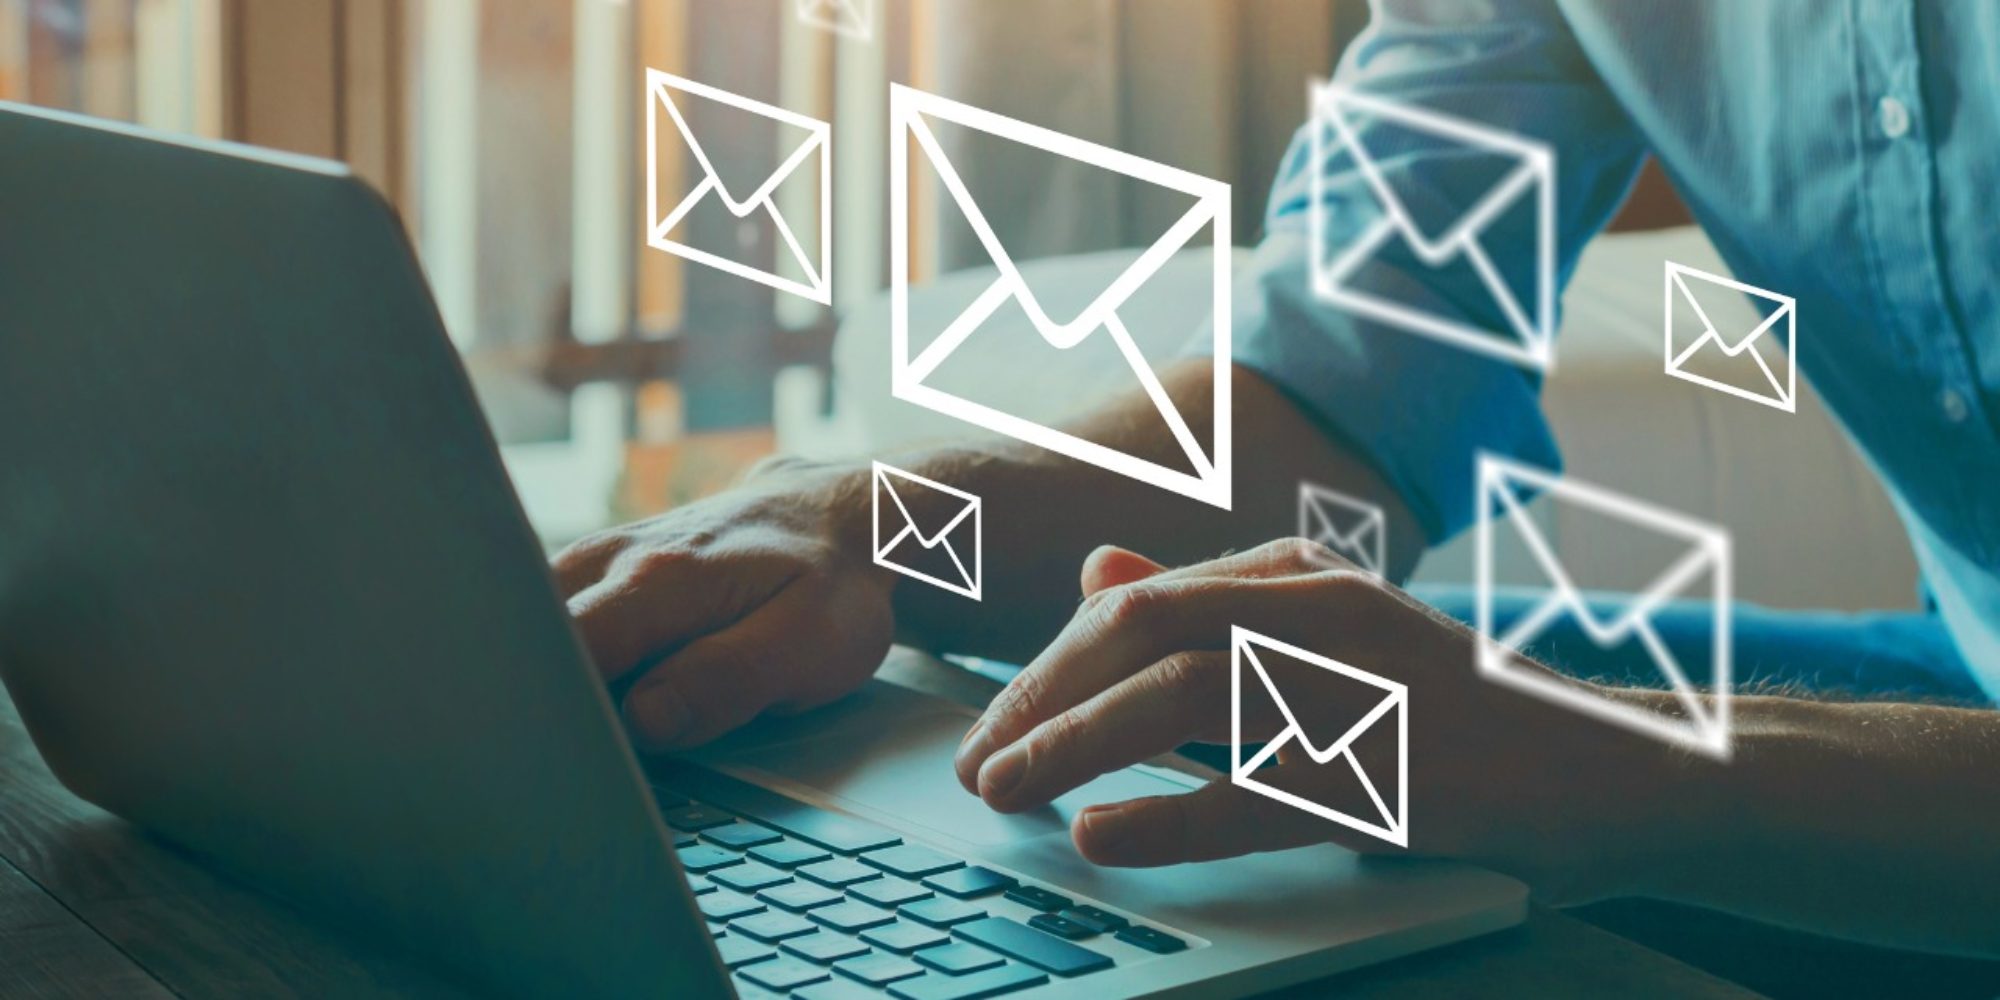 Two Ways to Manage Your Email So You Can Find It Later